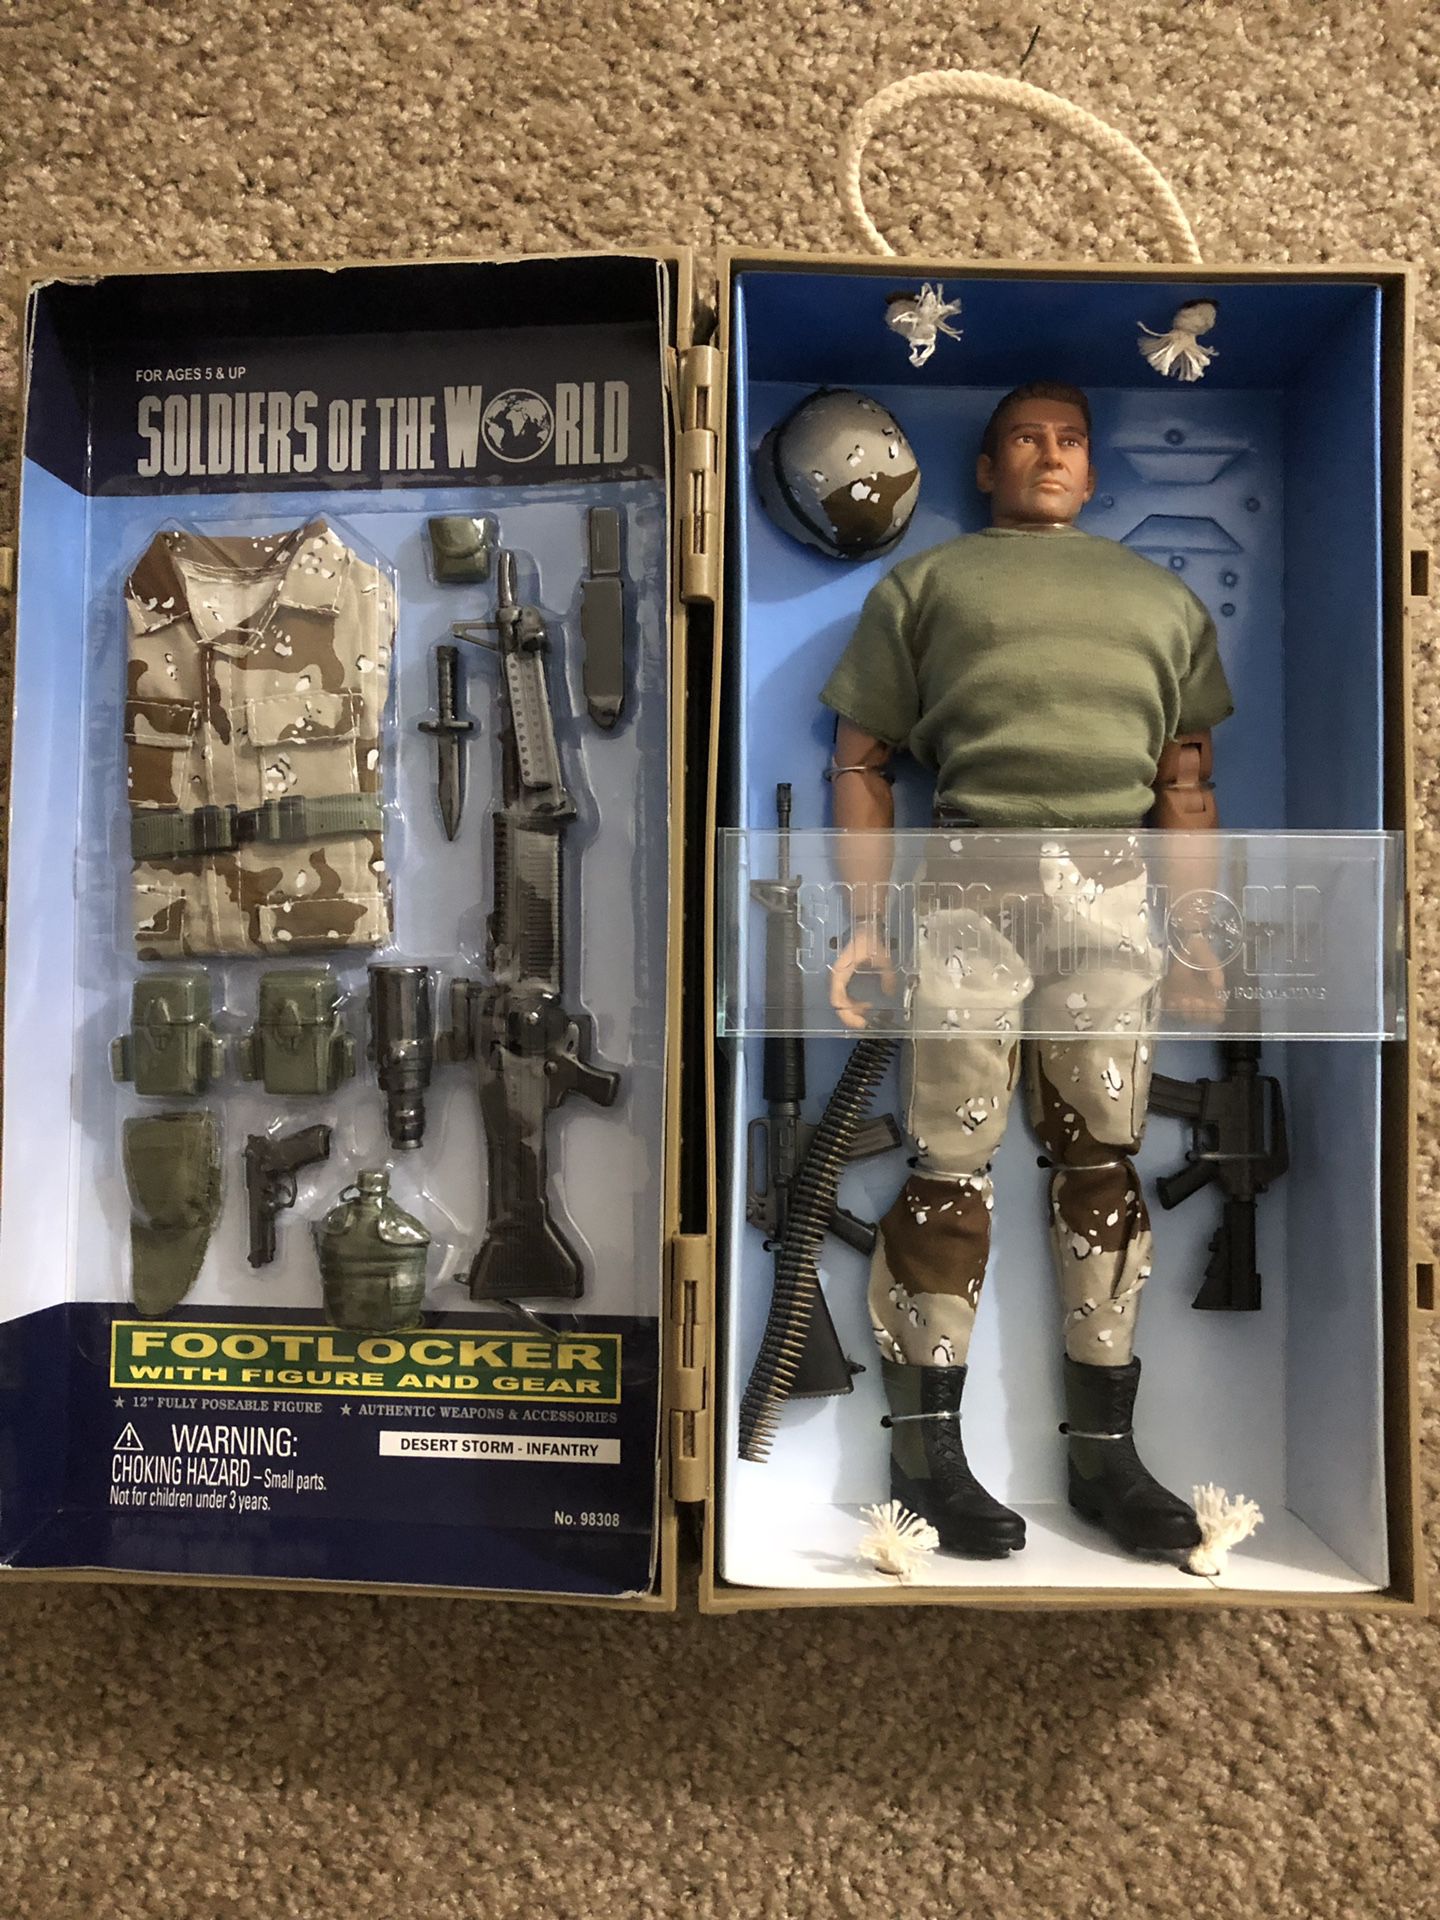 Toy collectable. Soldiers of The World. Desert Storm